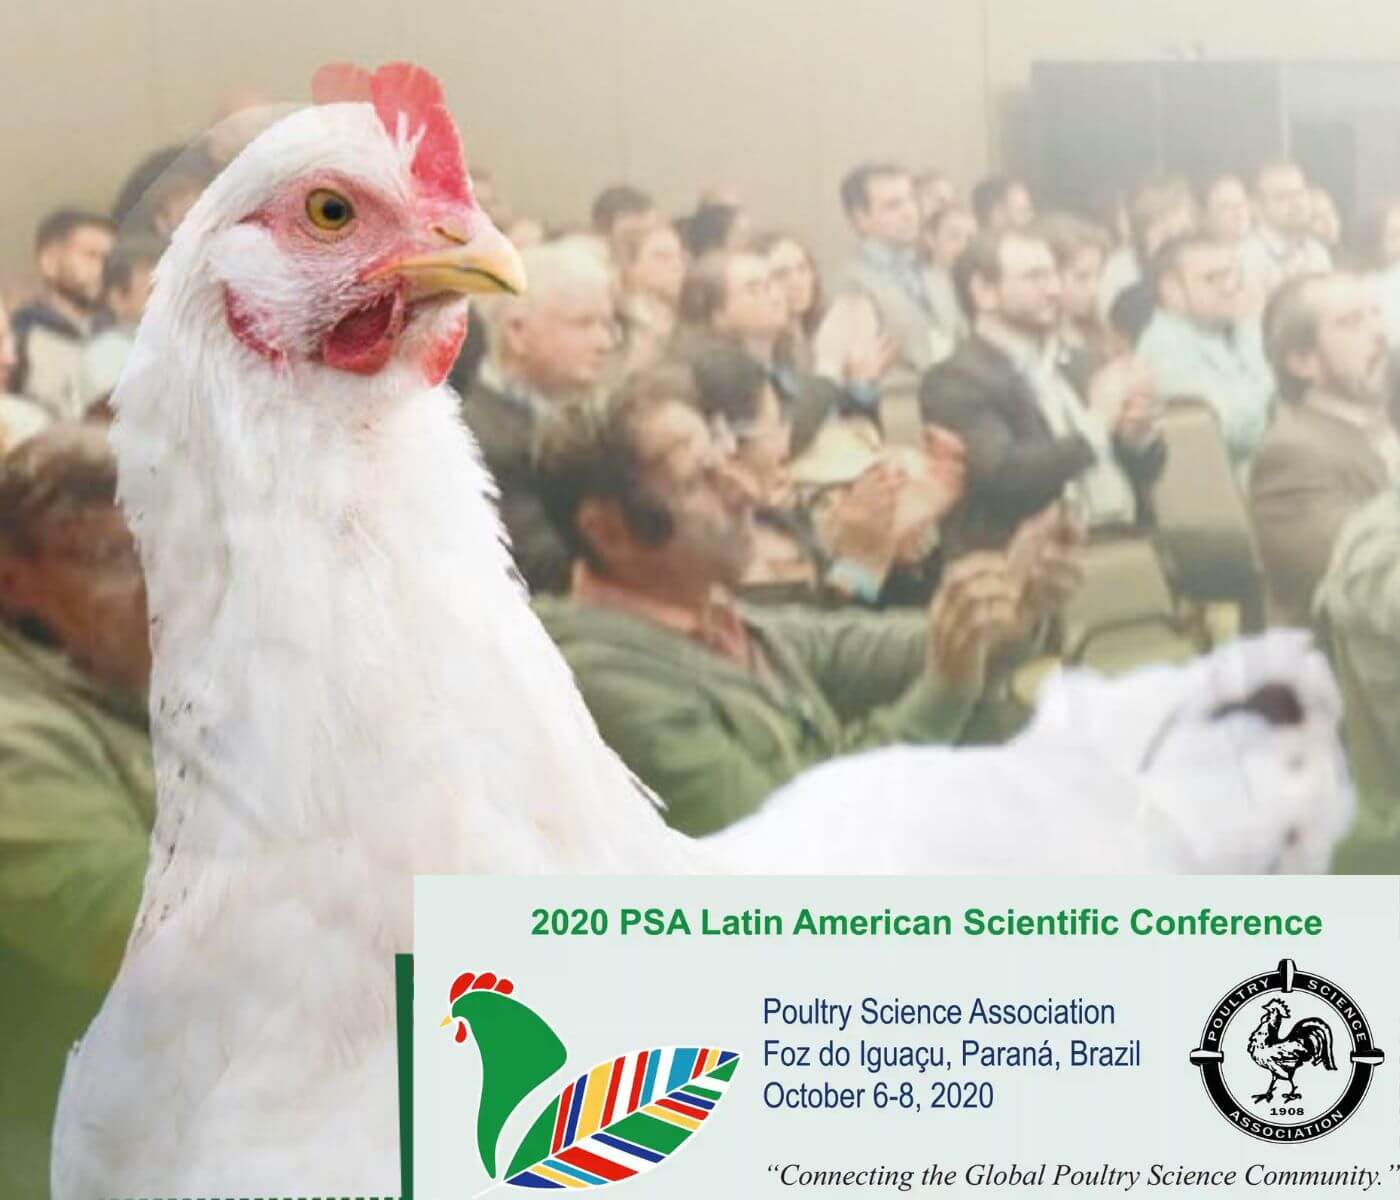 Synopsis of the 3rd Latin American PSA conference